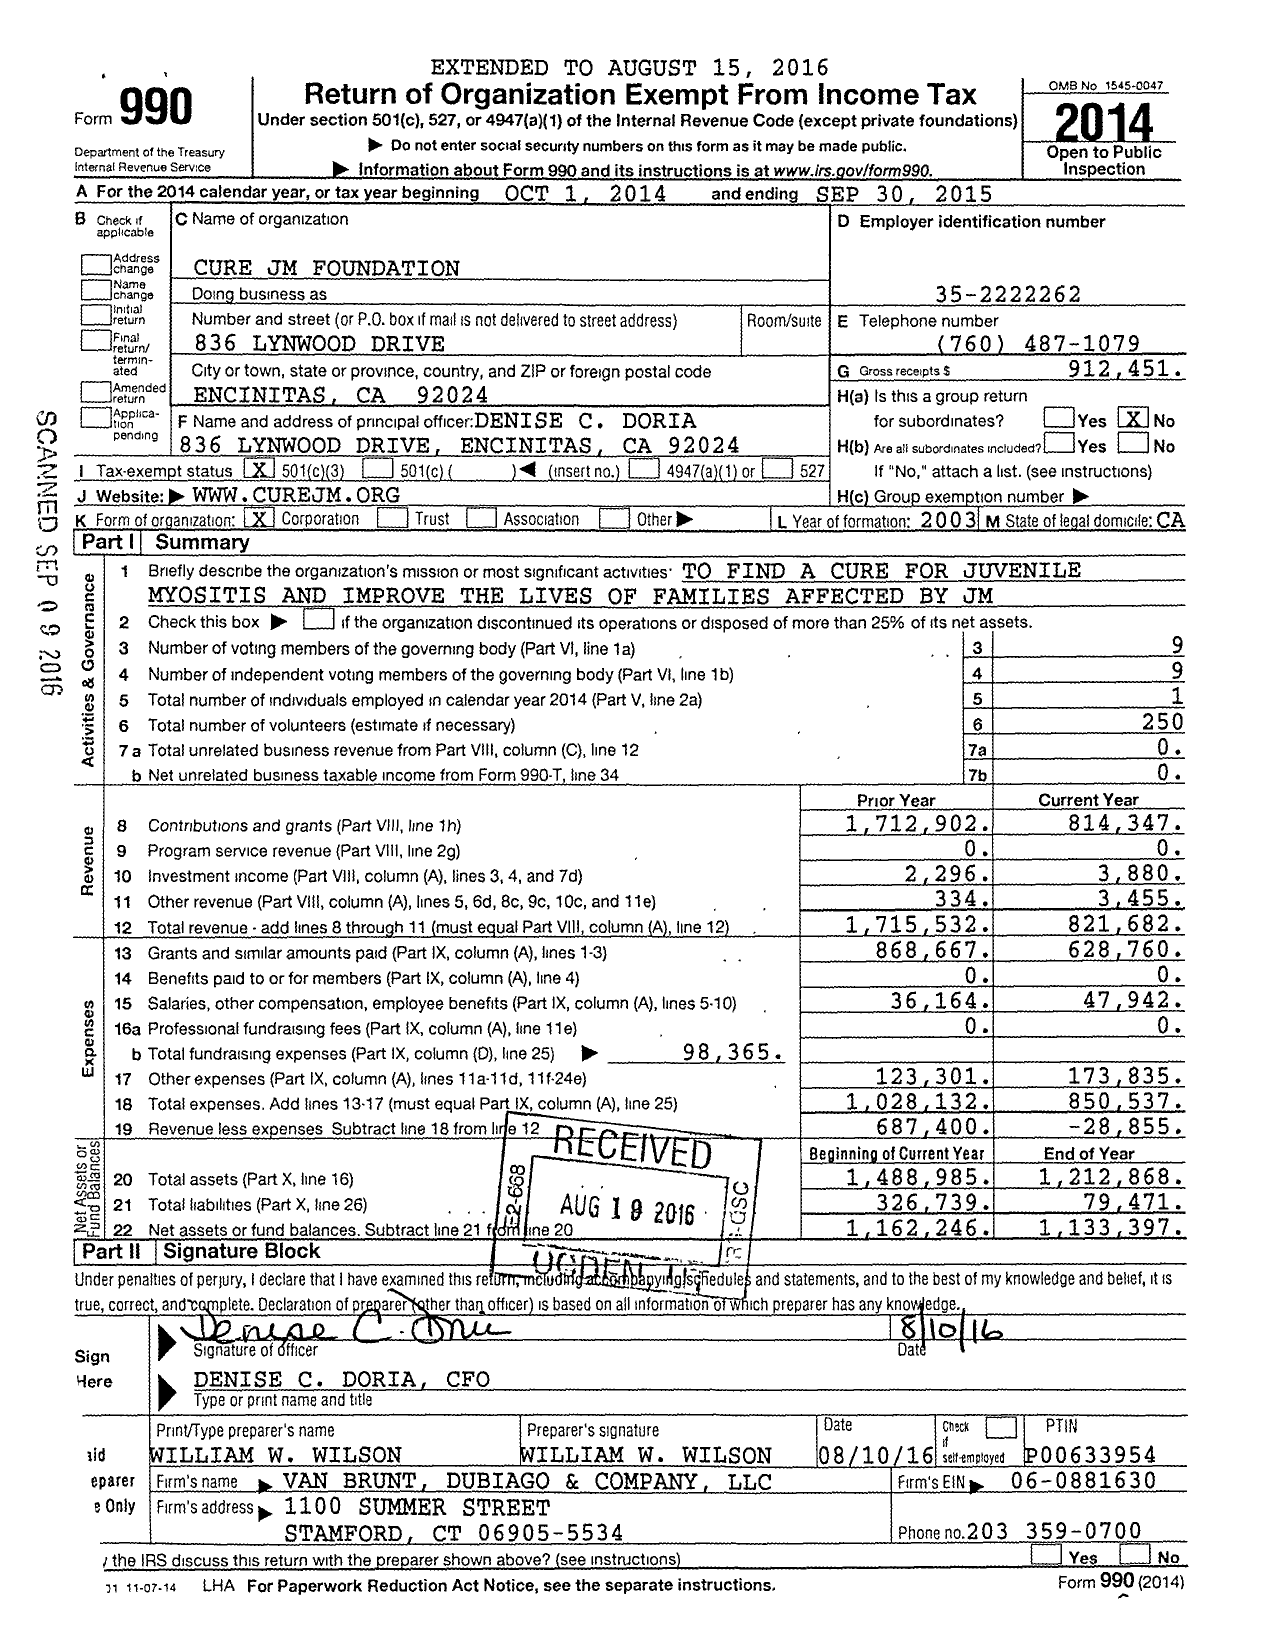 Image of first page of 2014 Form 990 for Cure JM Foundation